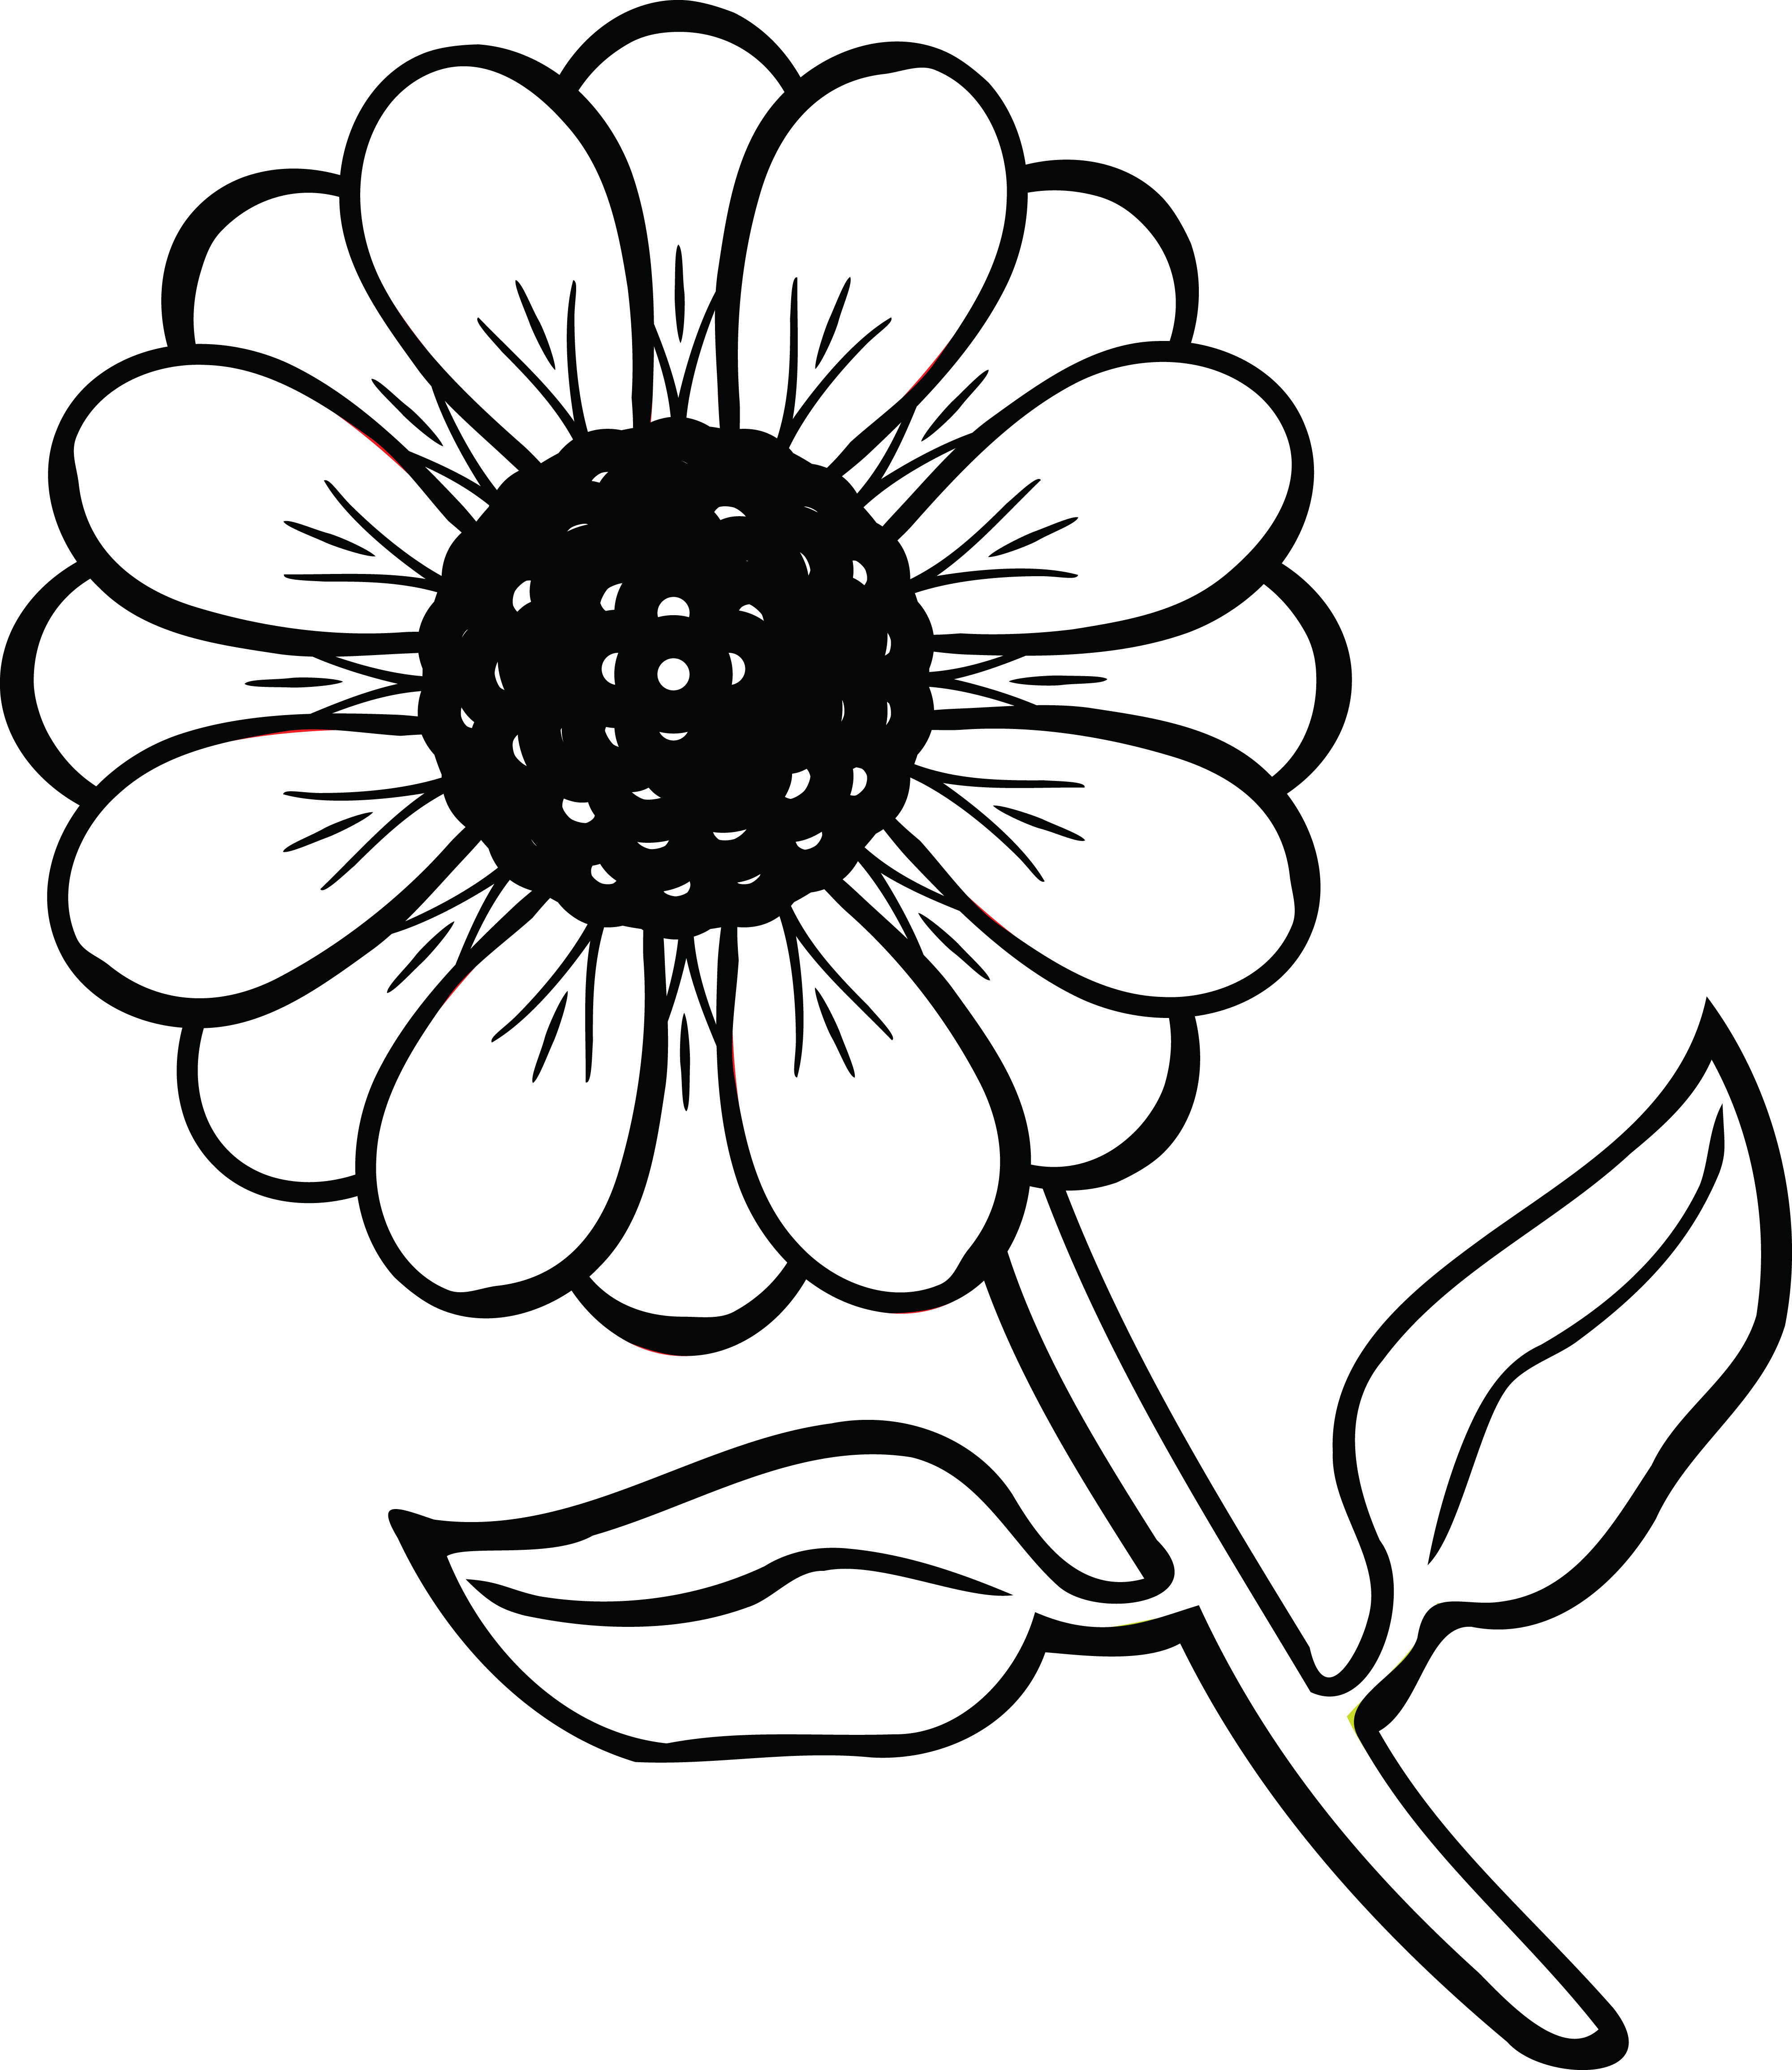 Flowers clipart black and white, Flowers black and white Transparent